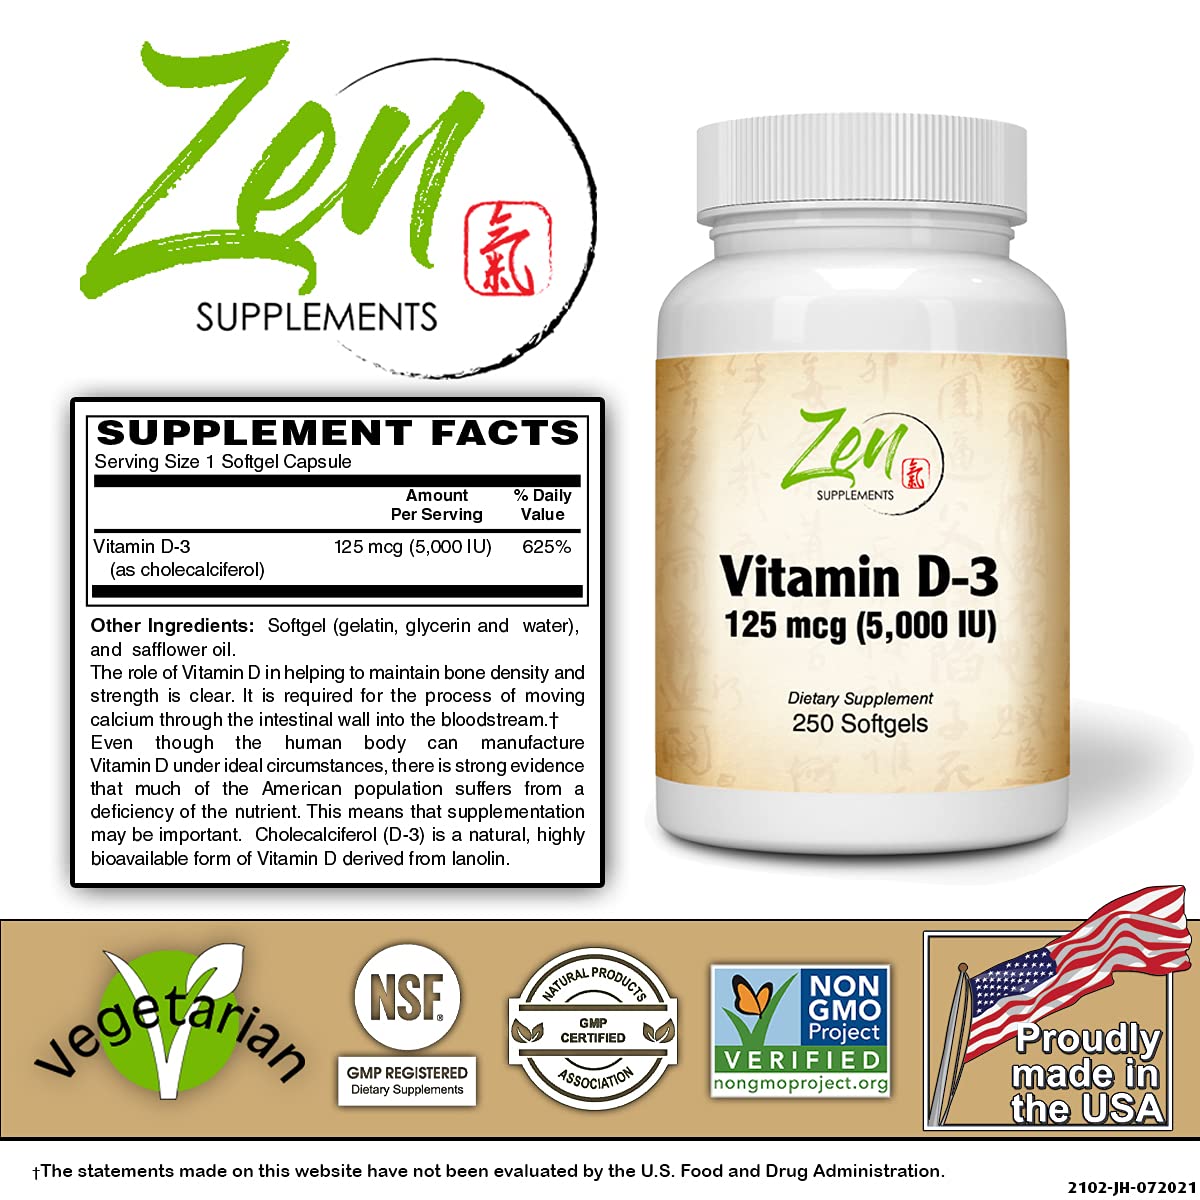 Zen Supplements - Vitamin D-3 5000 IU 250-Softgel - Supports Healthy Muscle Function, Bone Health & Immune Support